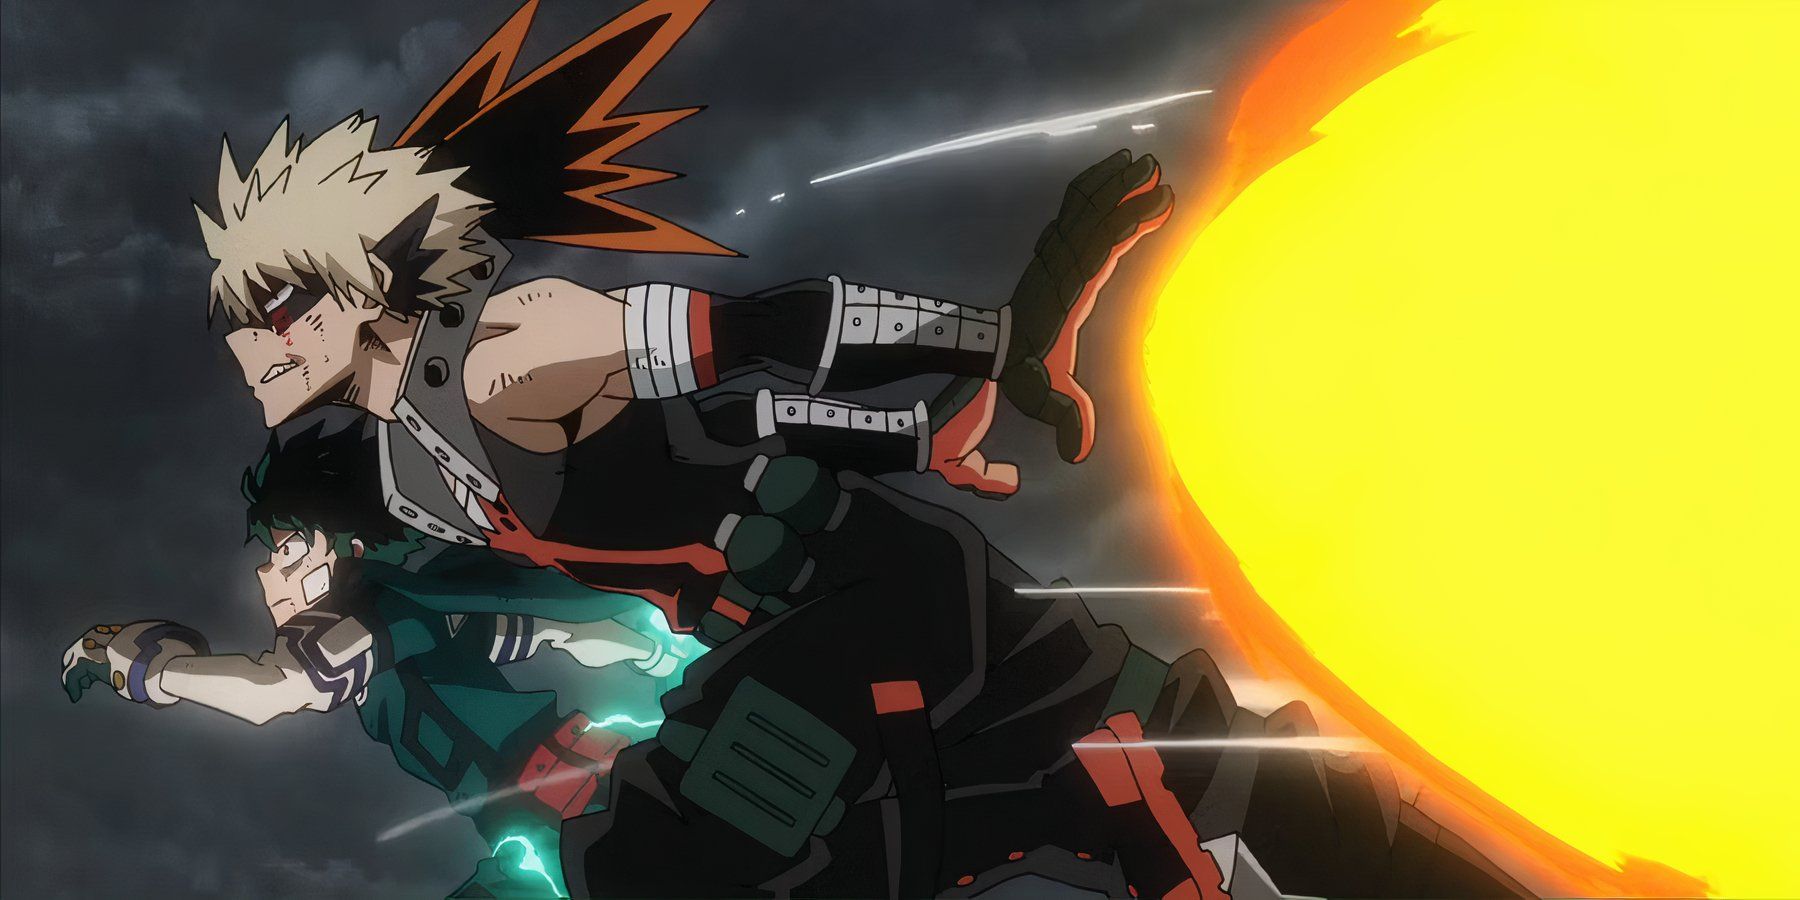 Bakugo flying through the air with his Explosion Quirk in My Hero Academia